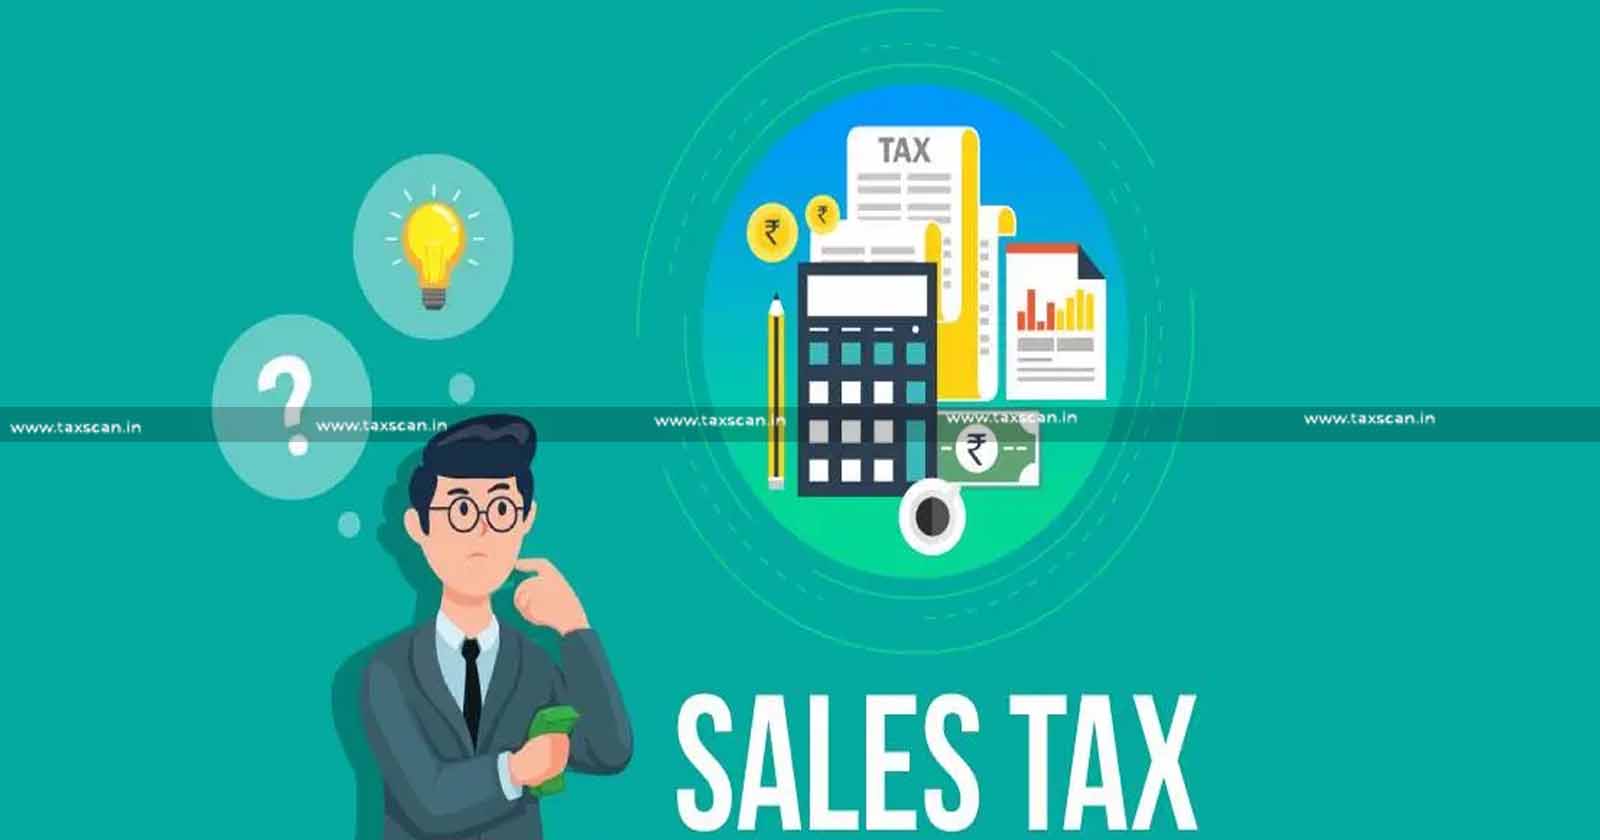 Charge - Sales - Tax - Dept - Recover - Sales Tax - Dues - Valid - Recognition - First - Charge - Assessee - Creditor - TAXSCANA